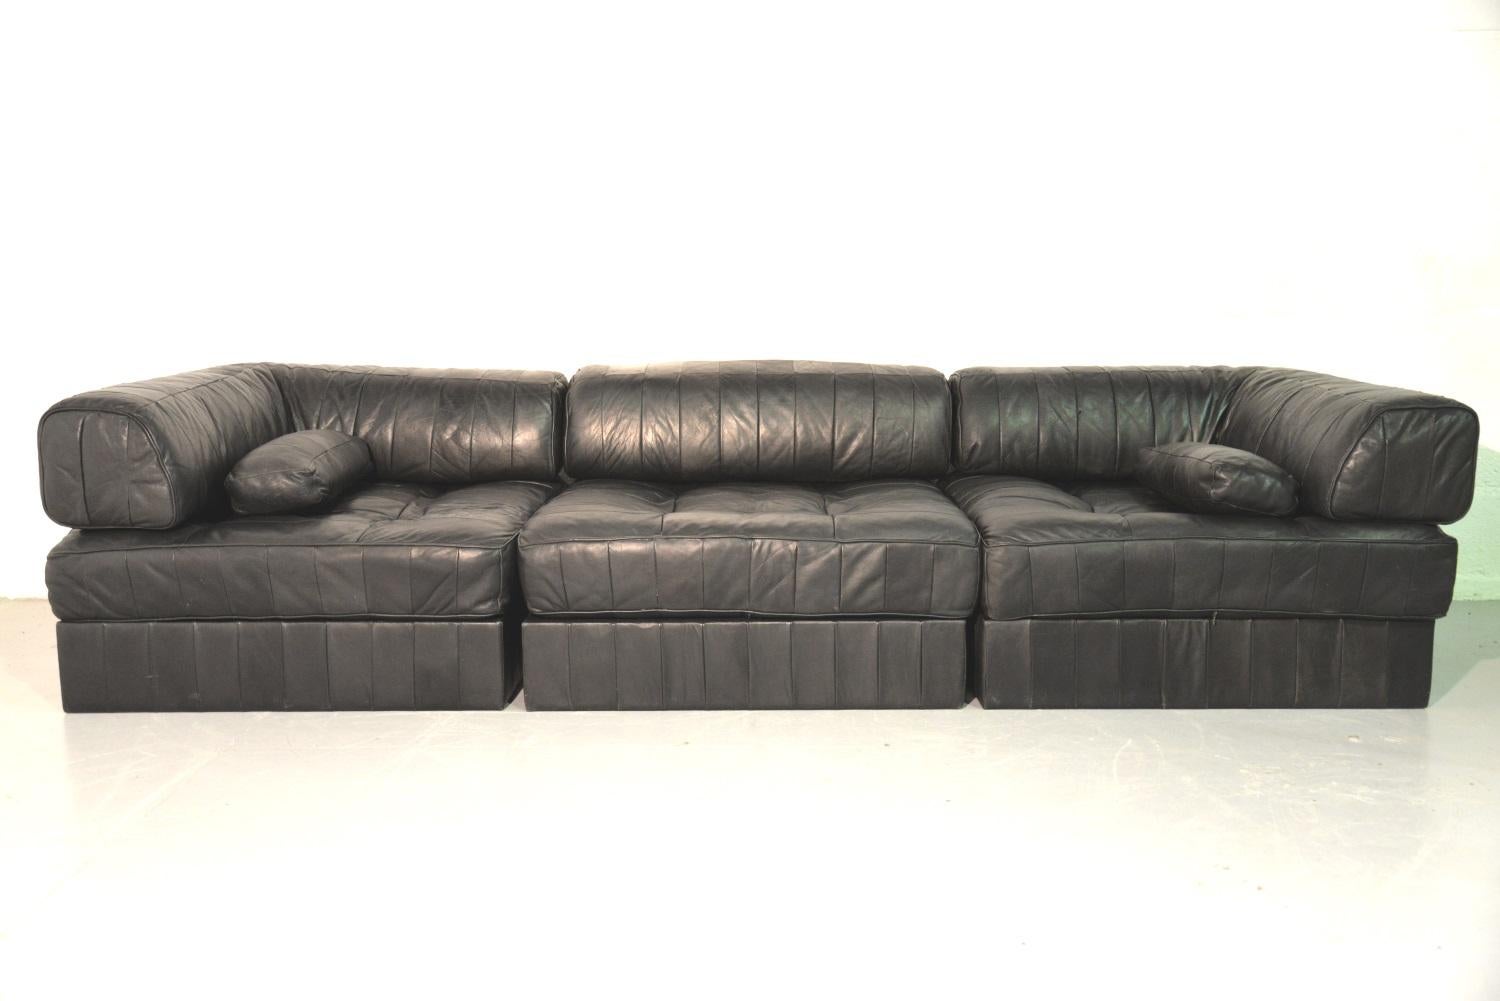 Discounted airfreight for our US and International customers (from 2 weeks door to door)

We are delighted to bring to you an original and extremely desirable De Sede DS 88 sectional sofa or daybed in patchwork aniline leather with bolster cushions.